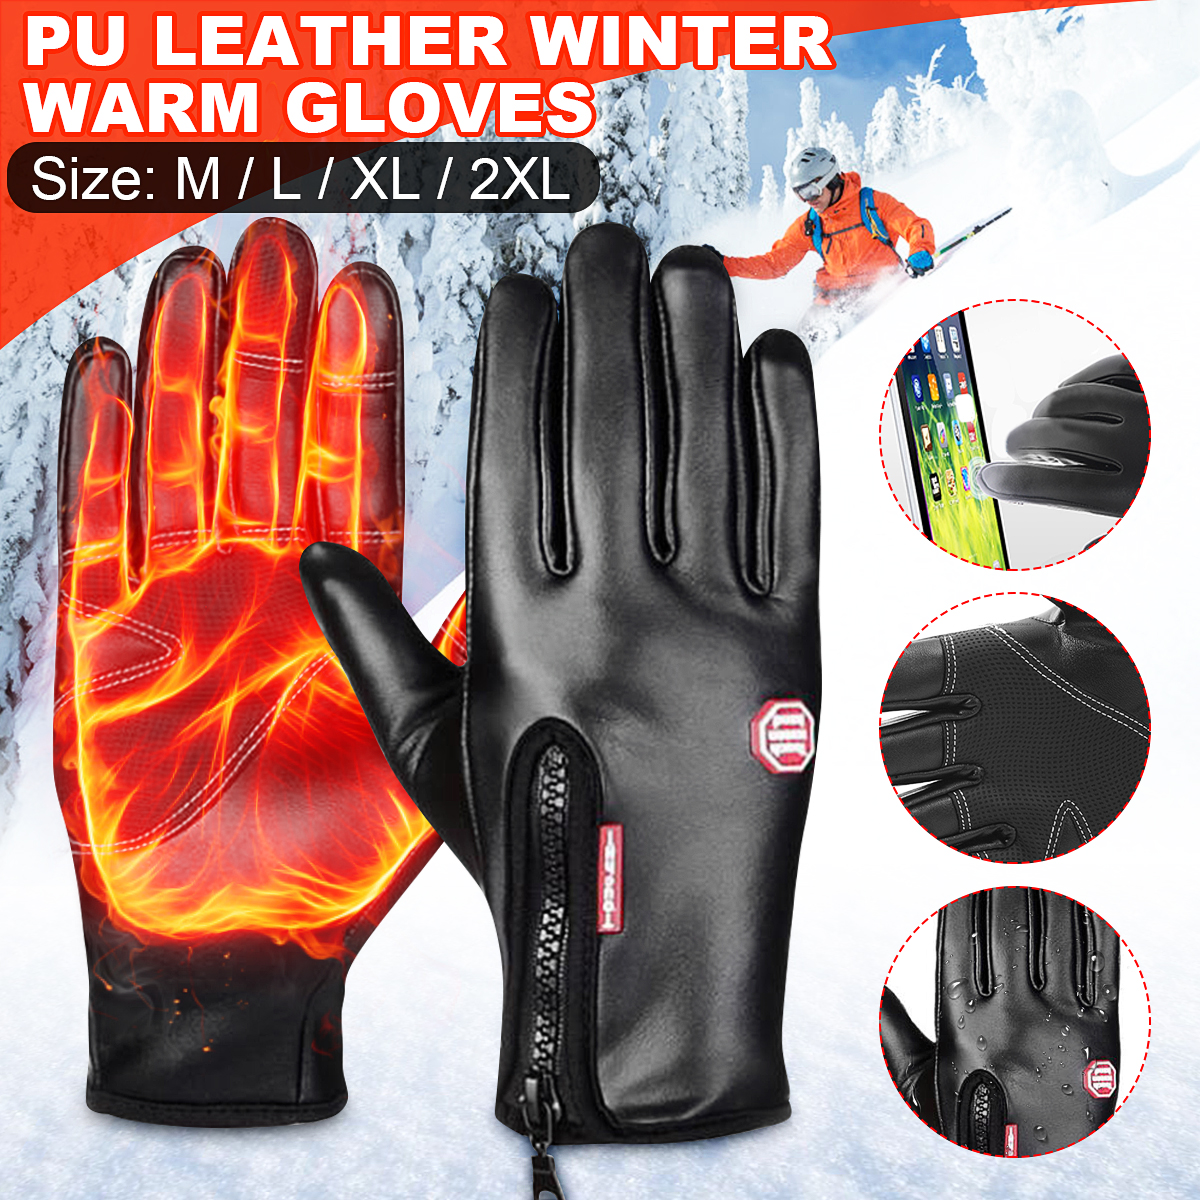 Winter-Warm-Touch-Screen-PU-Leather-Gloves-Ski-Snow-Snowboard-Cycling-Waterproof-Windproof-Gloves-1923190-1